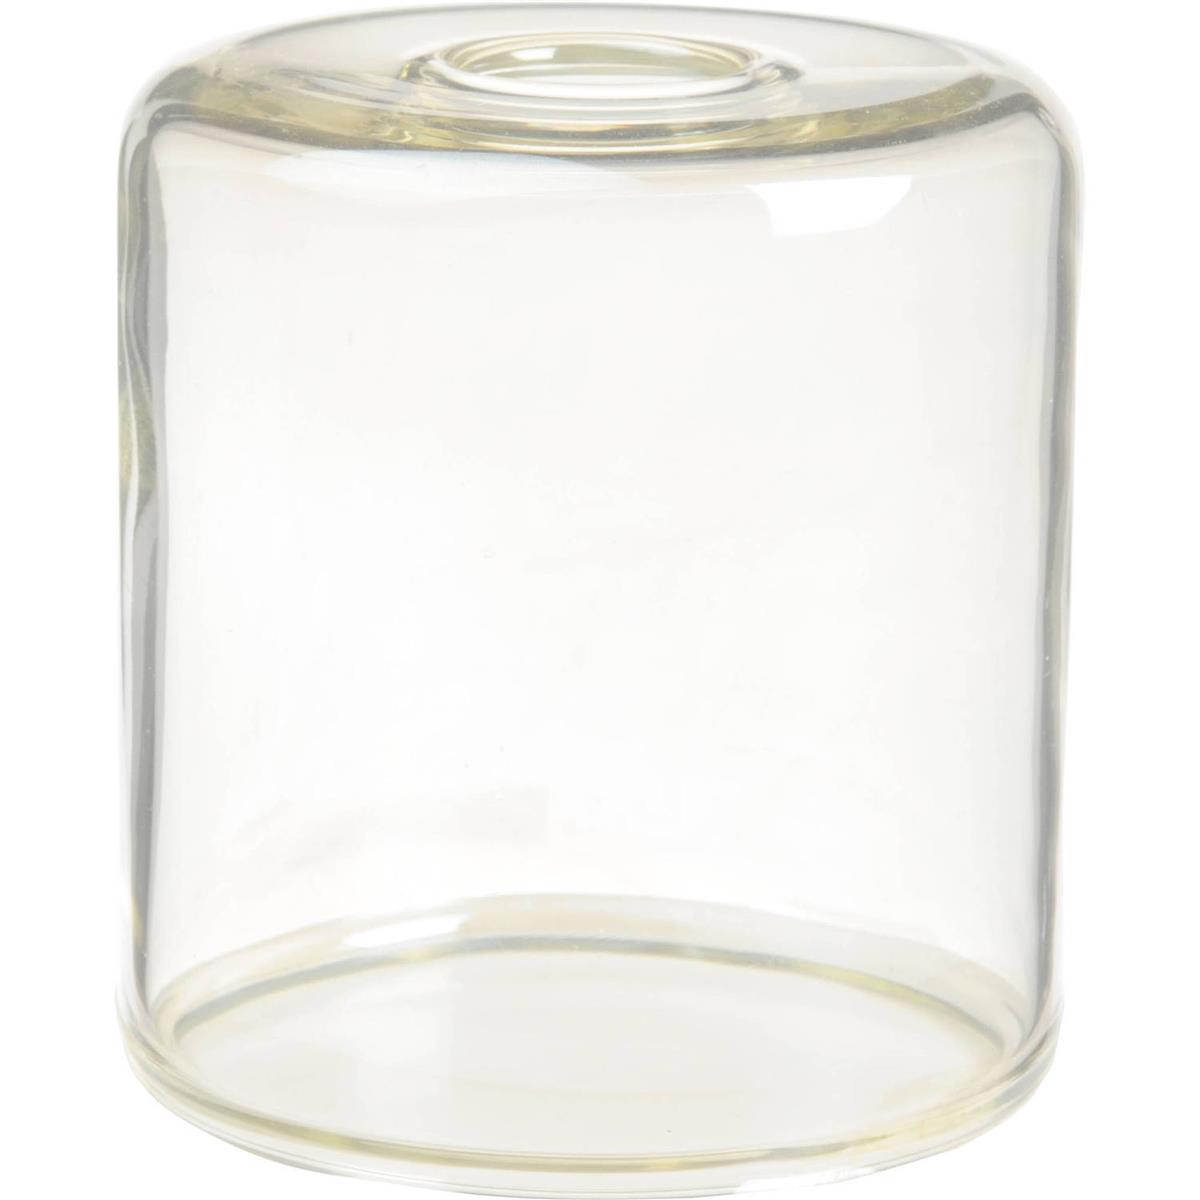 Image of Hensel Coated Clear Glass Dome for Integra Series Monolights